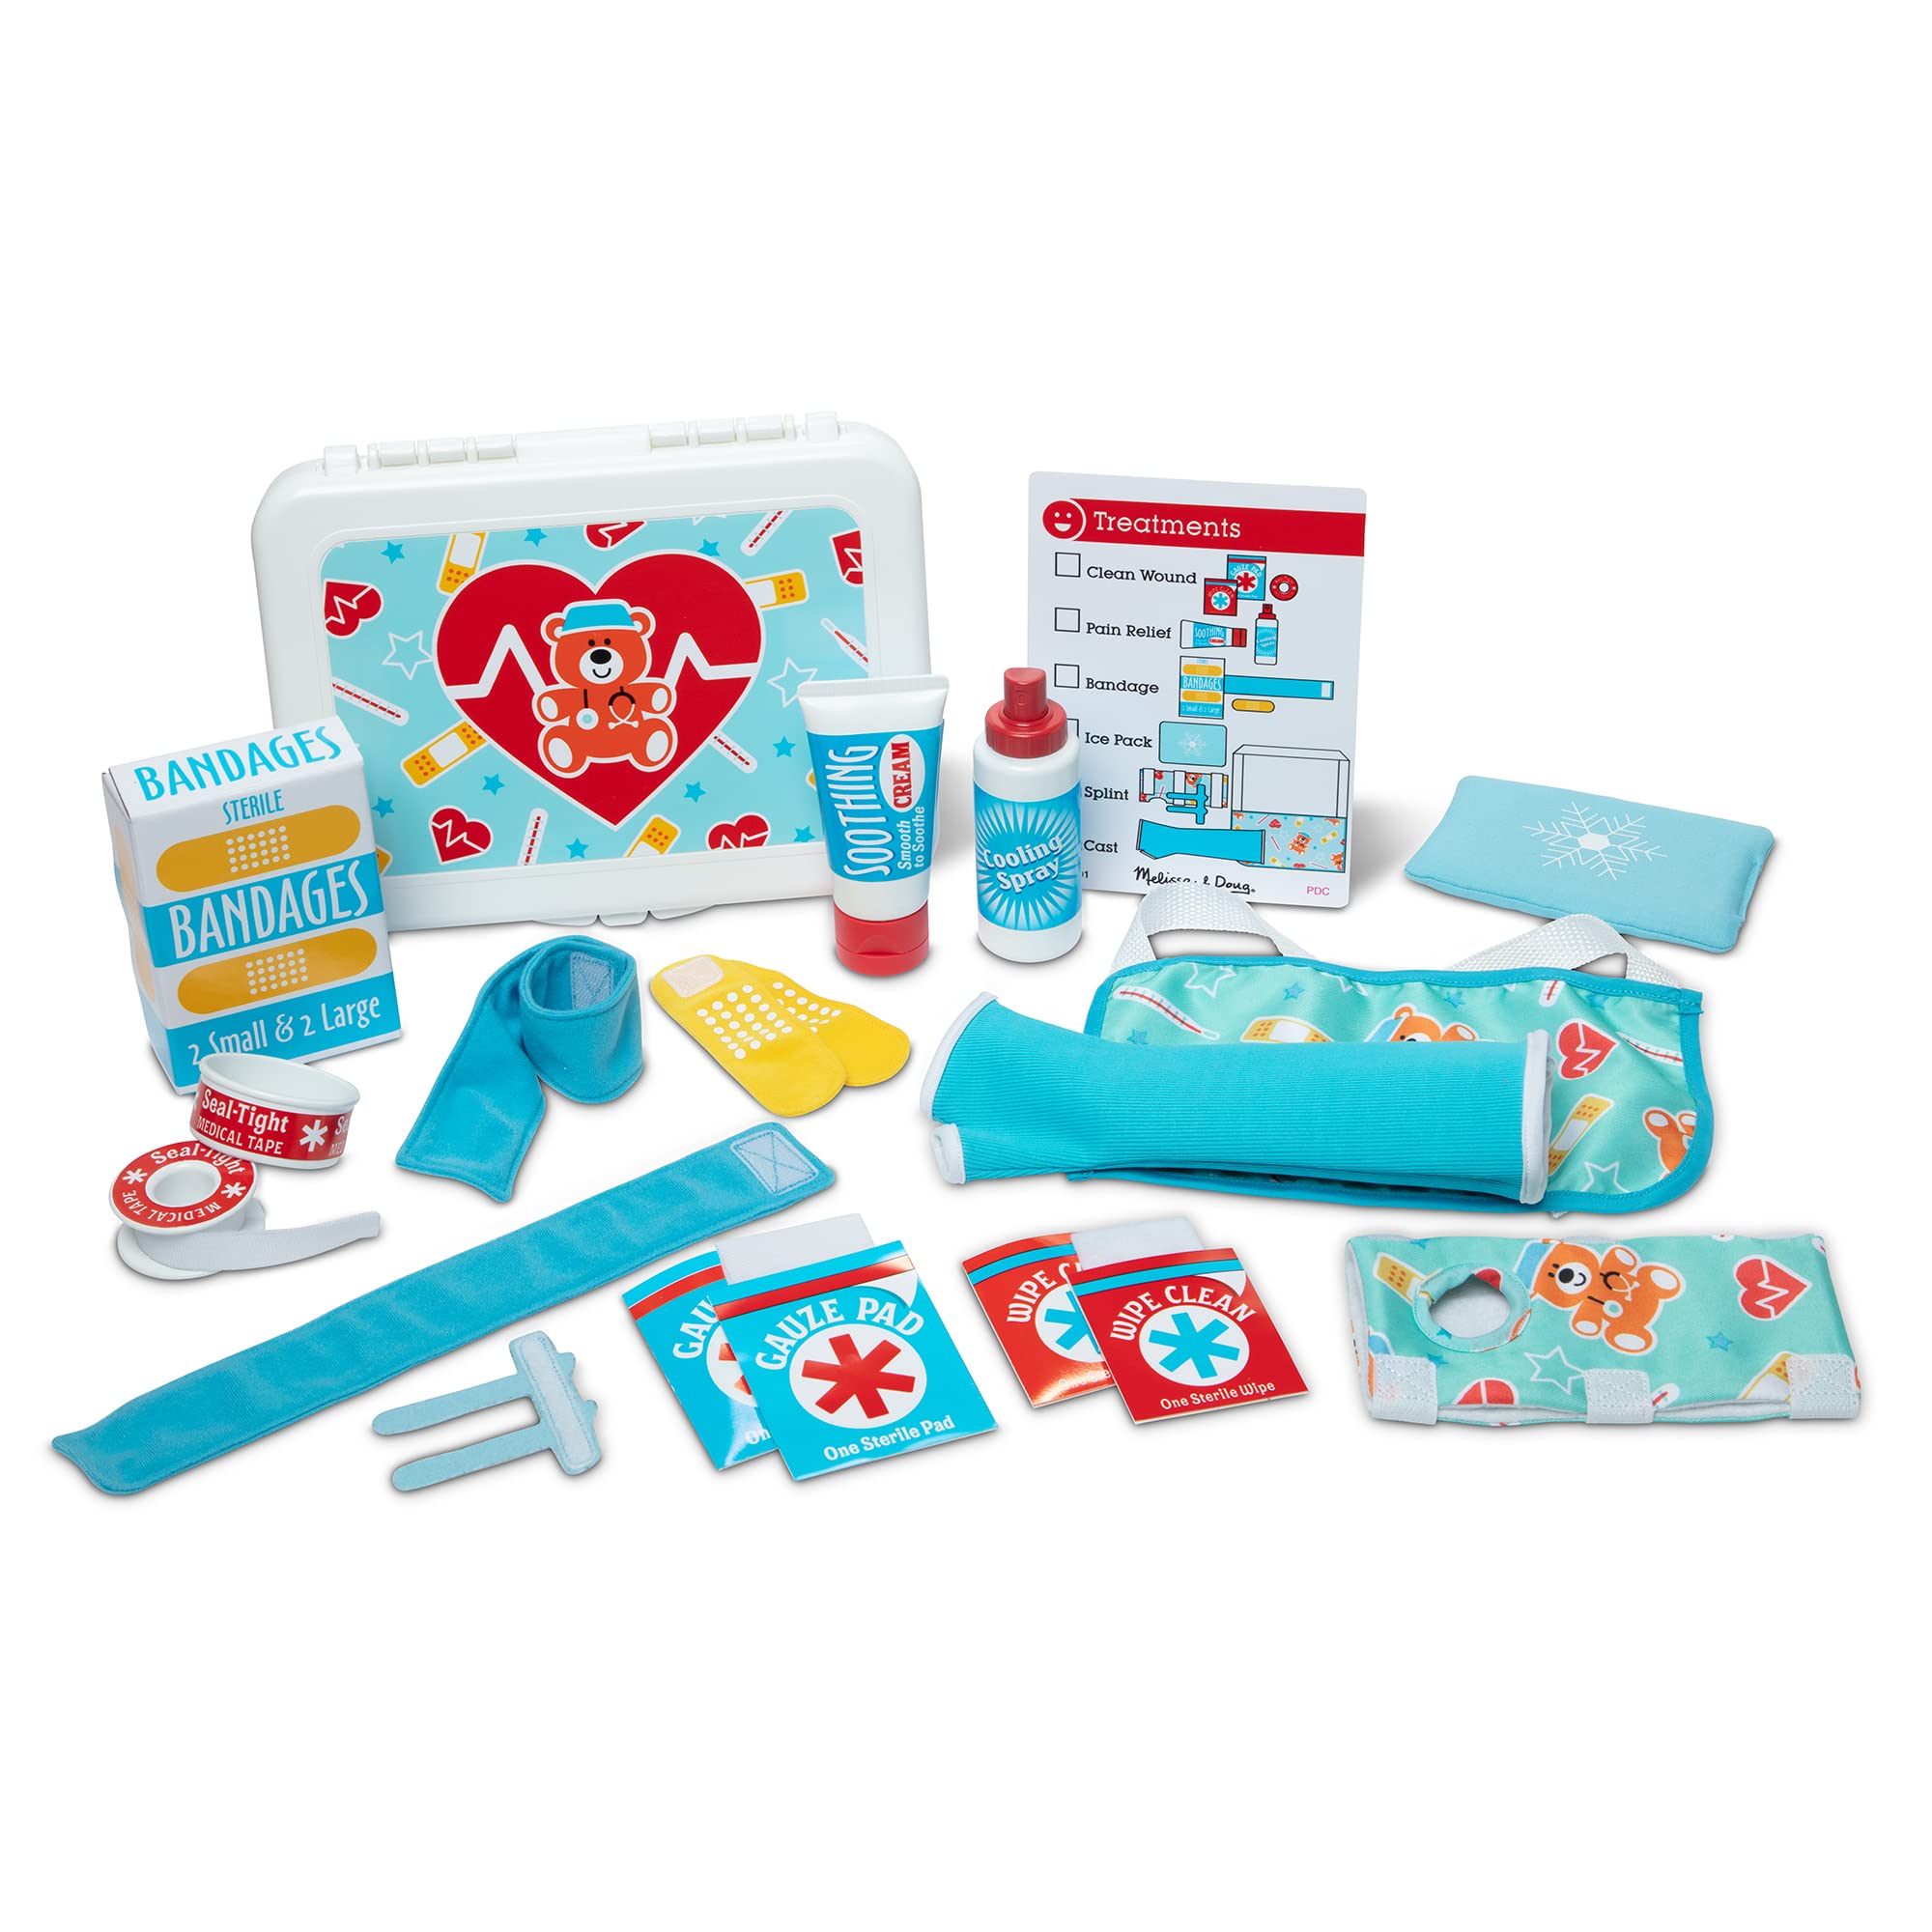 Melissa & Doug Get Well First Aid Kit Play Set – 25 Toy Pieces - Pretend Play Reusable Bandages